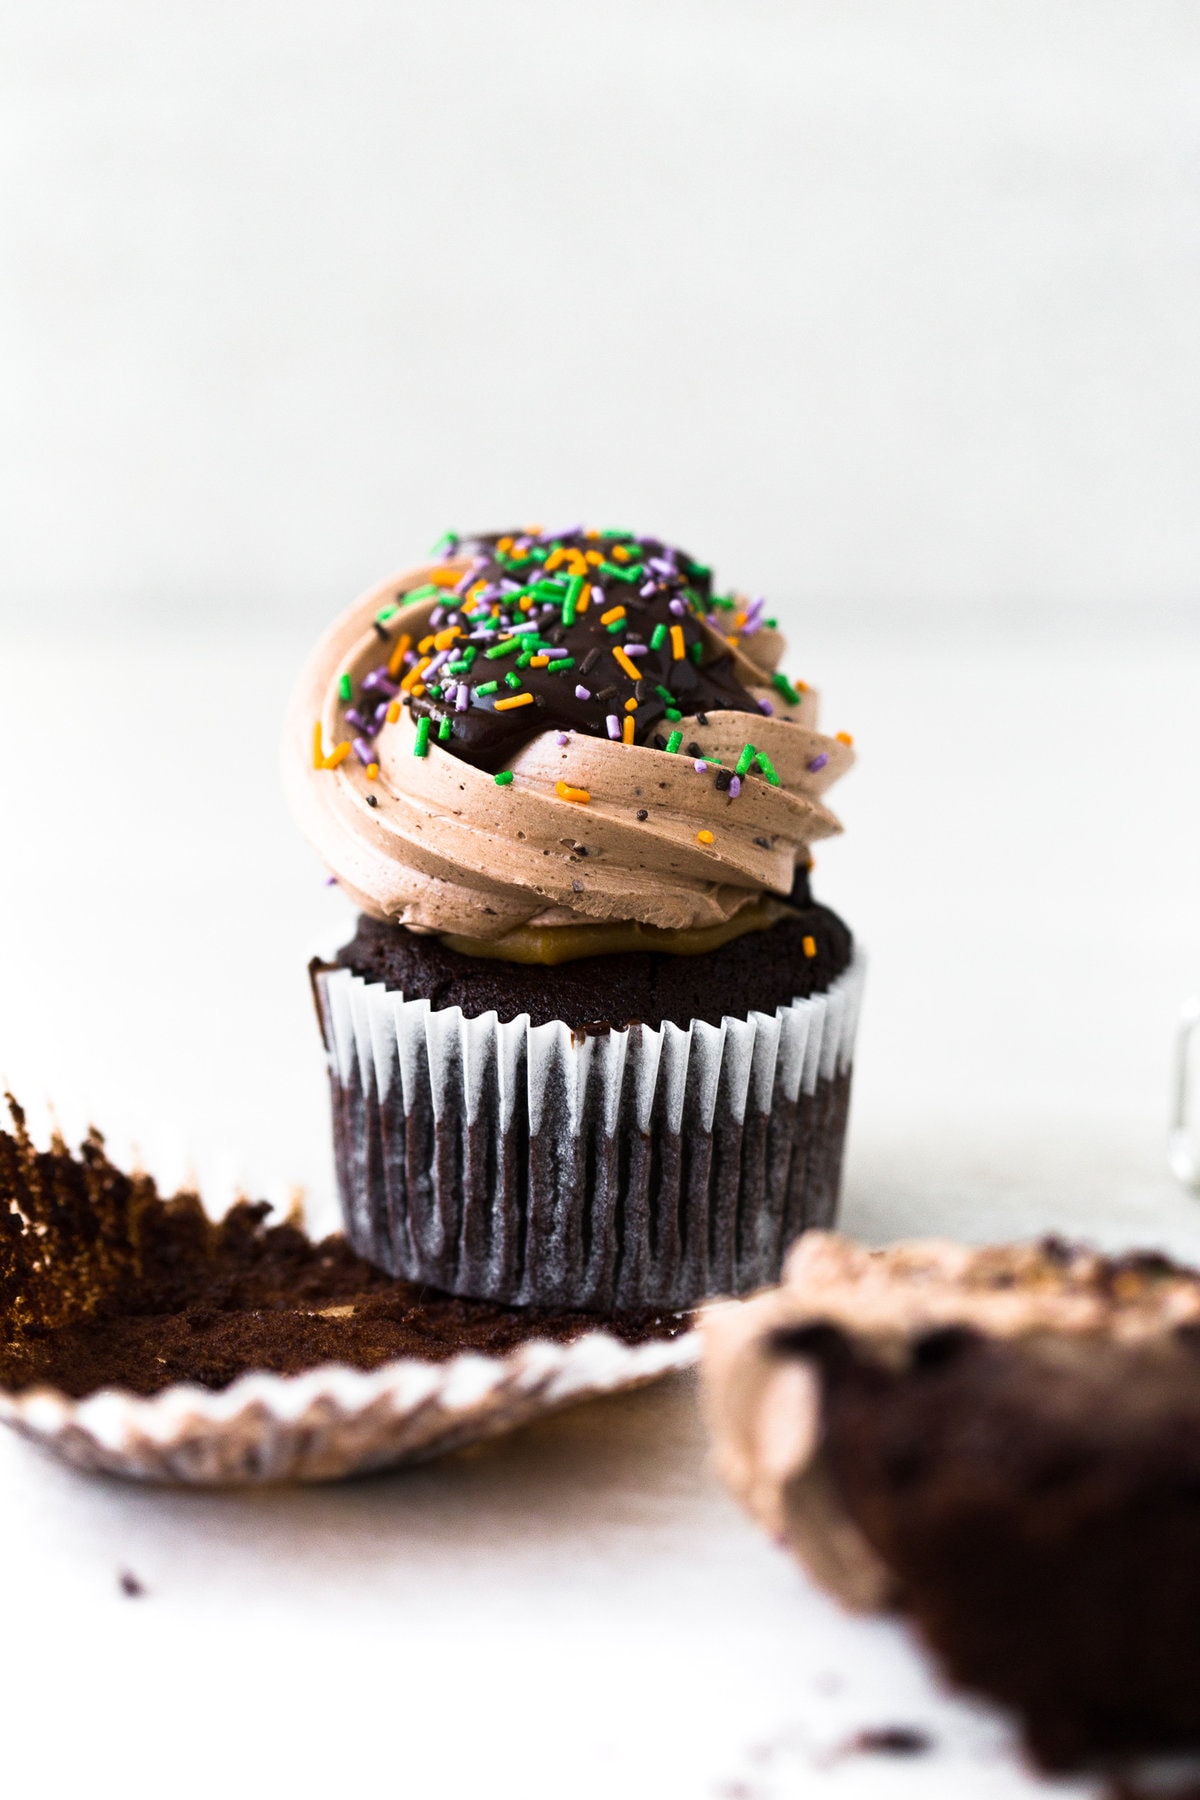 The Ultimate Vegan Chocolate Cupcakes. Tender Chocolate Cake filled with Chocolate Ganache and loaded with Vegan Chocolate Buttercream Frosting. #vegan #chocolate #cupcakes #cake #baking #dairyfree #ganache #buttercream #veganbaking #plantbased